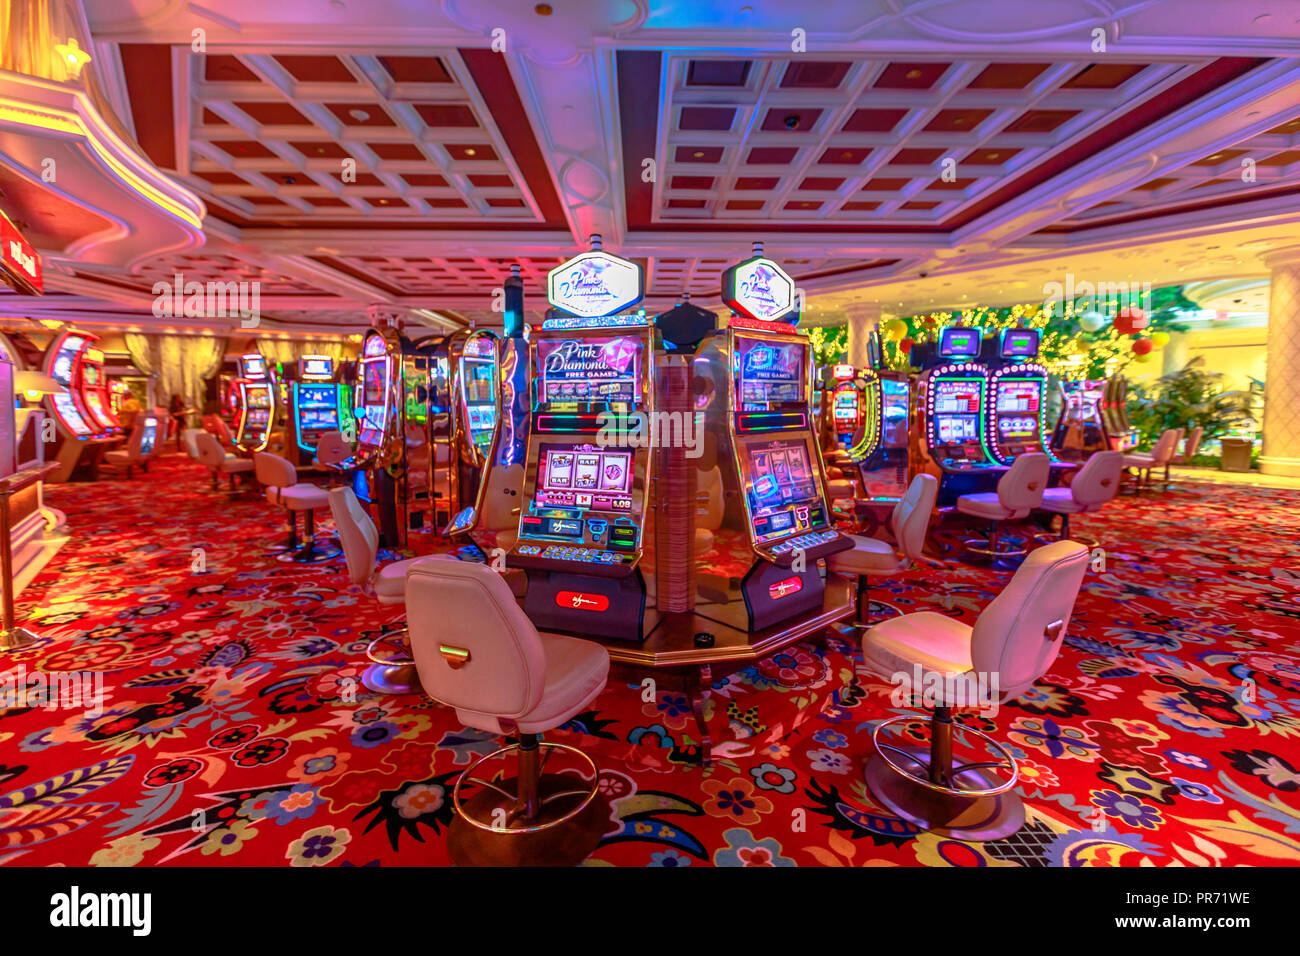 Las Vegas, Nevada, United States - August 18, 2018: slot machine inside luxurious Wynn Resort Hotel, a 5-star, themed Paradise, Las Vegas Strip. The hotel stands in place of old Desert inn. Stock Photo